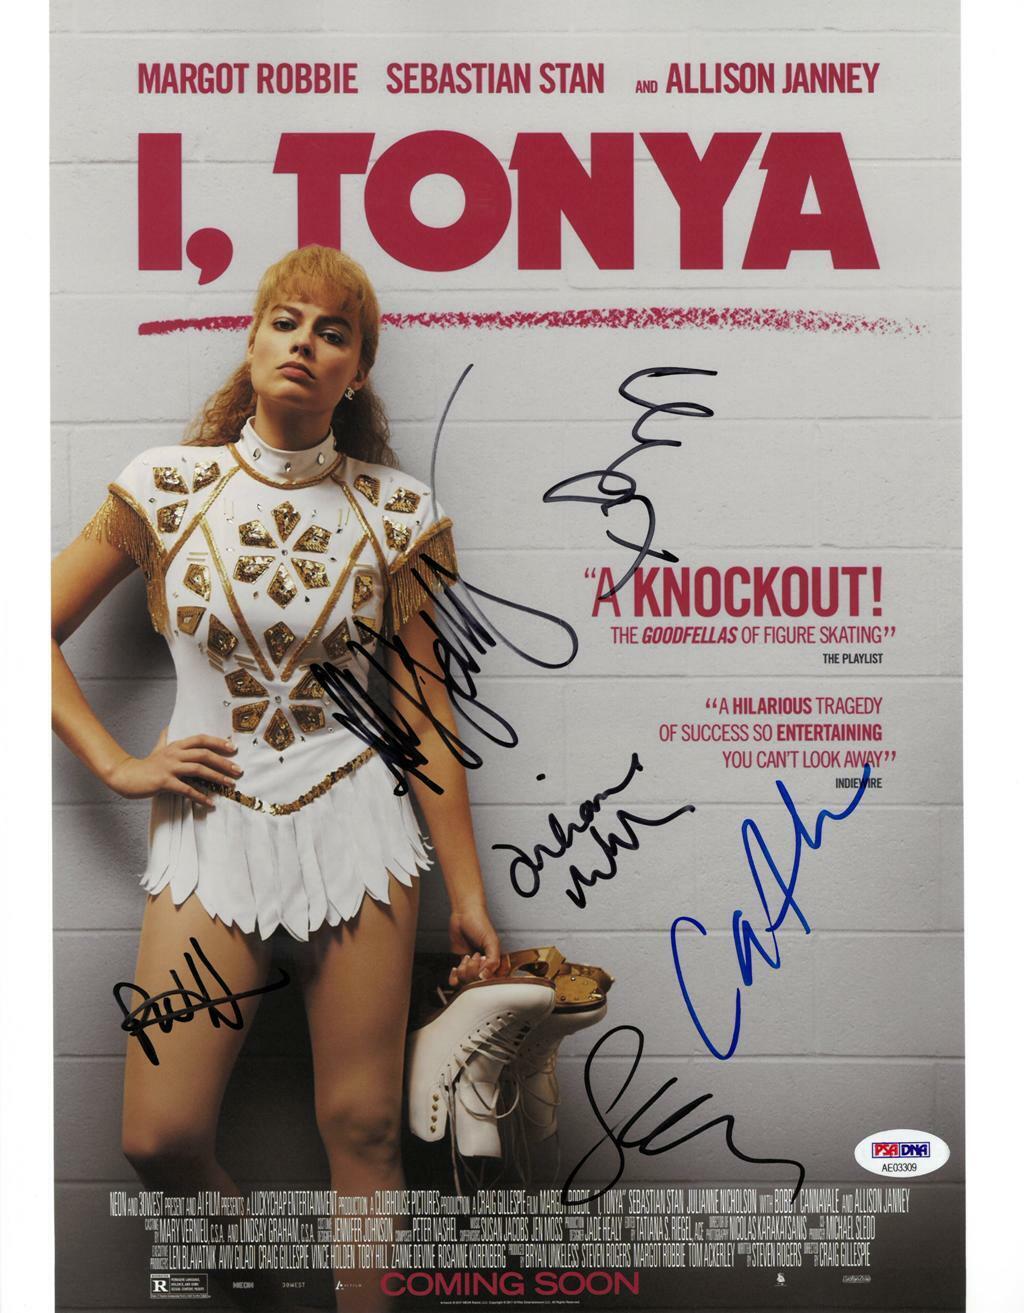 I, Tonya Cast (6 Sigs) Signed Authentic Autographed 11x14 Photo Poster painting PSA/DNA #AE03309